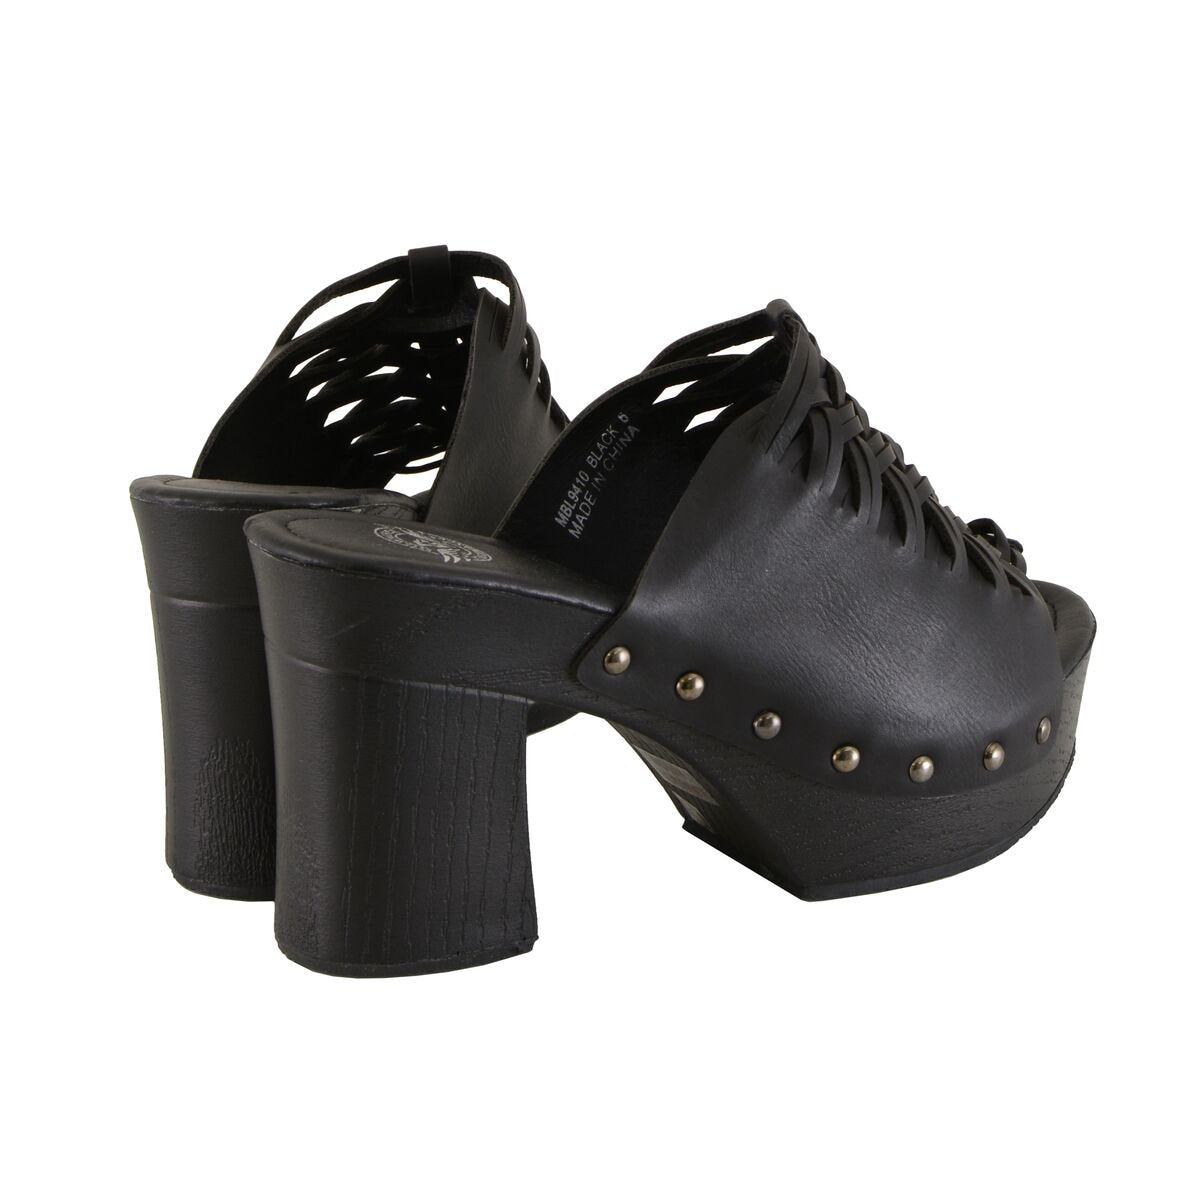 Milwaukee Leather MBL9410 Women's Black Open Toe Fashion Casual Platform Wedges with Studs